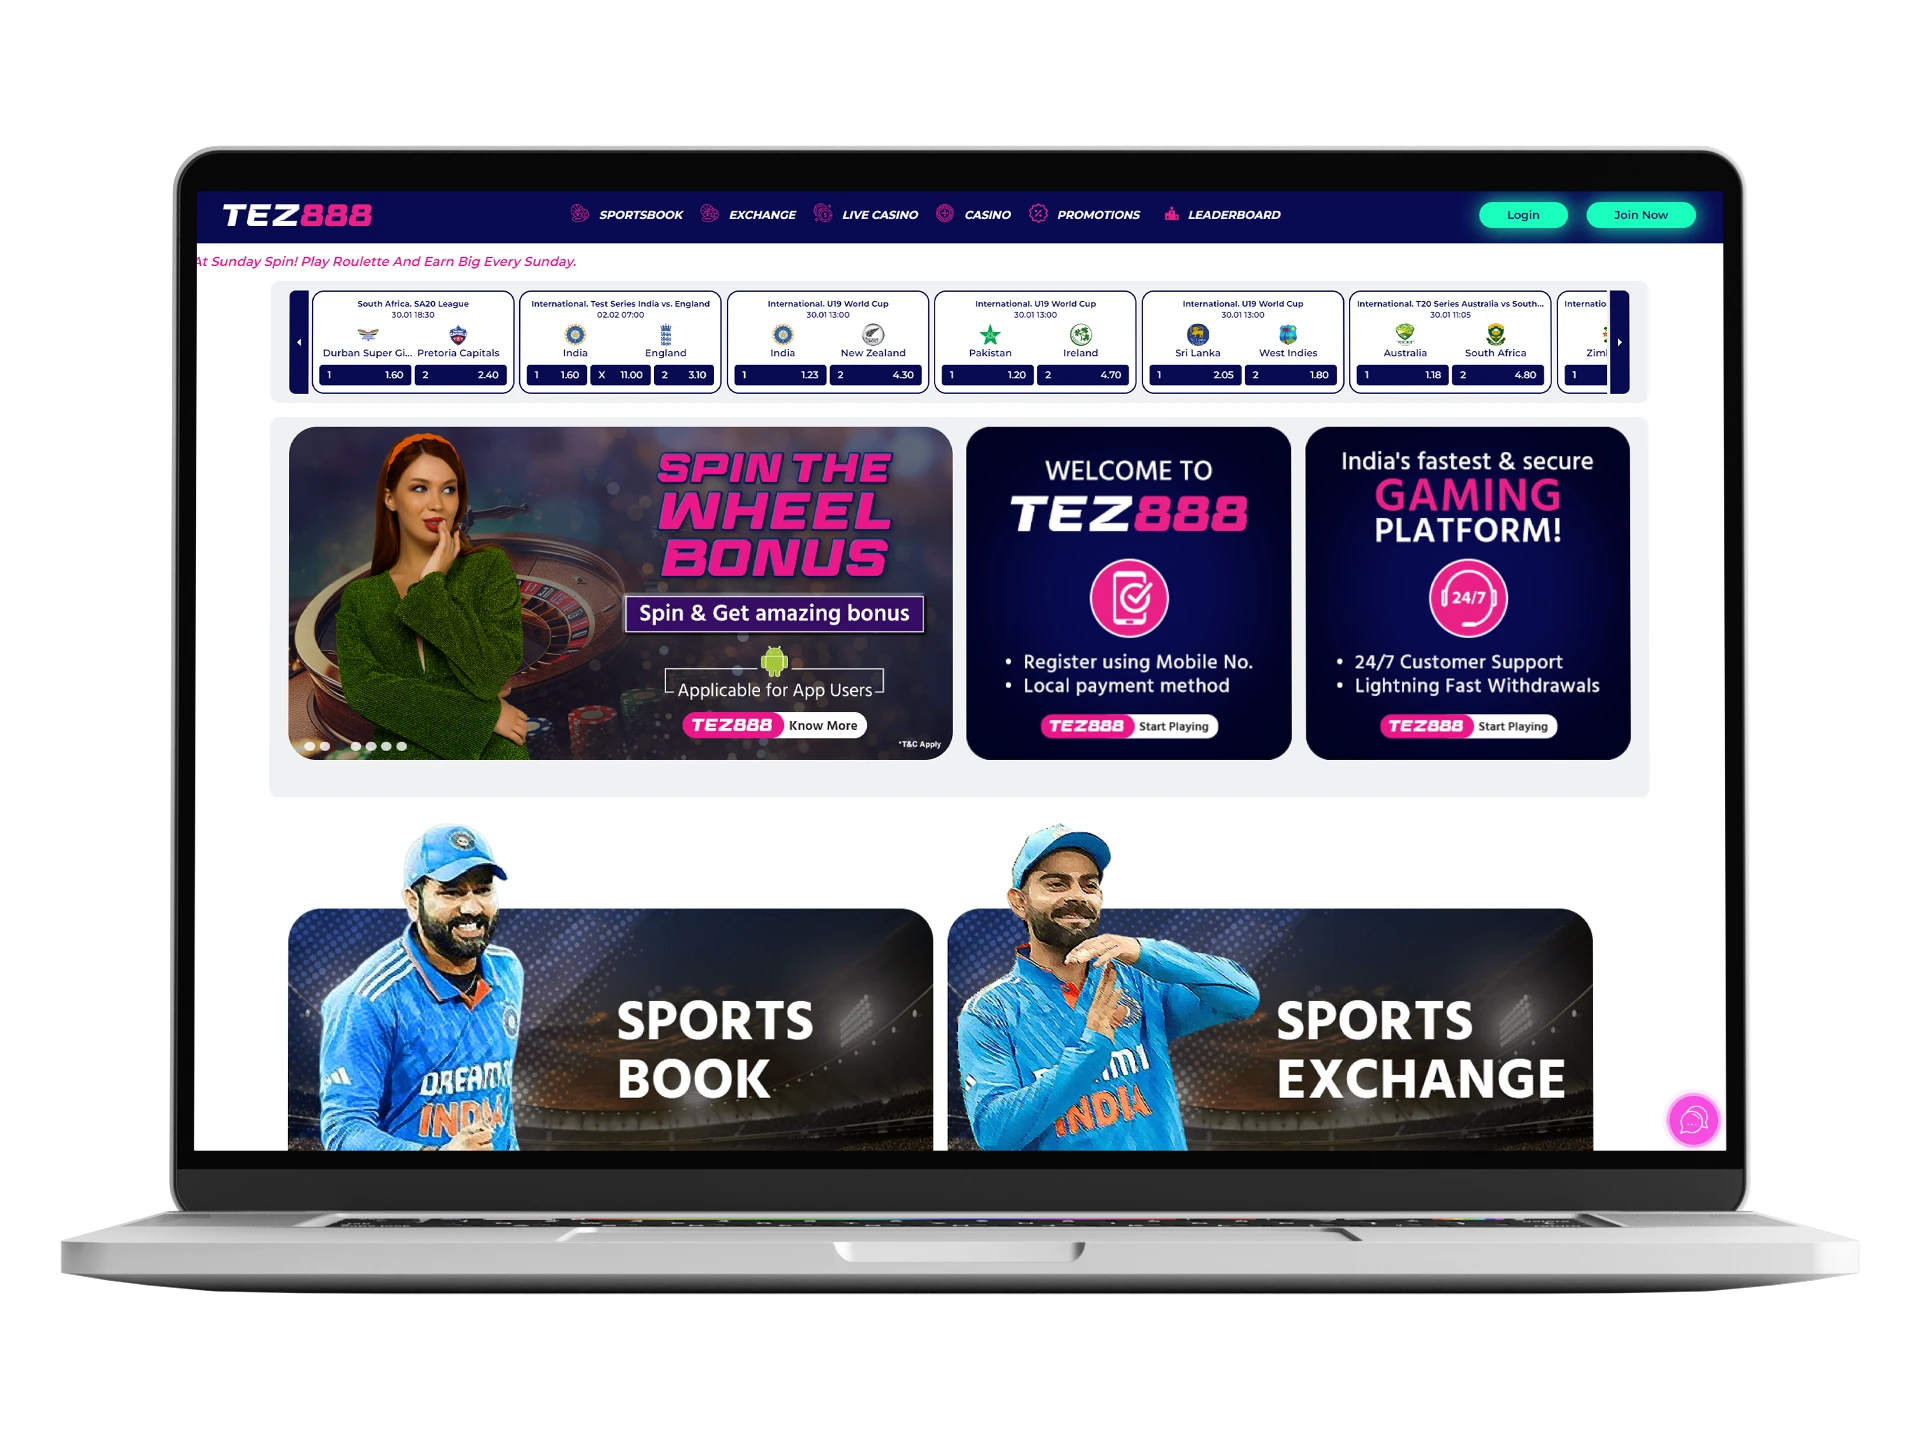 Tez888 offers a wide range of cricket betting lines.